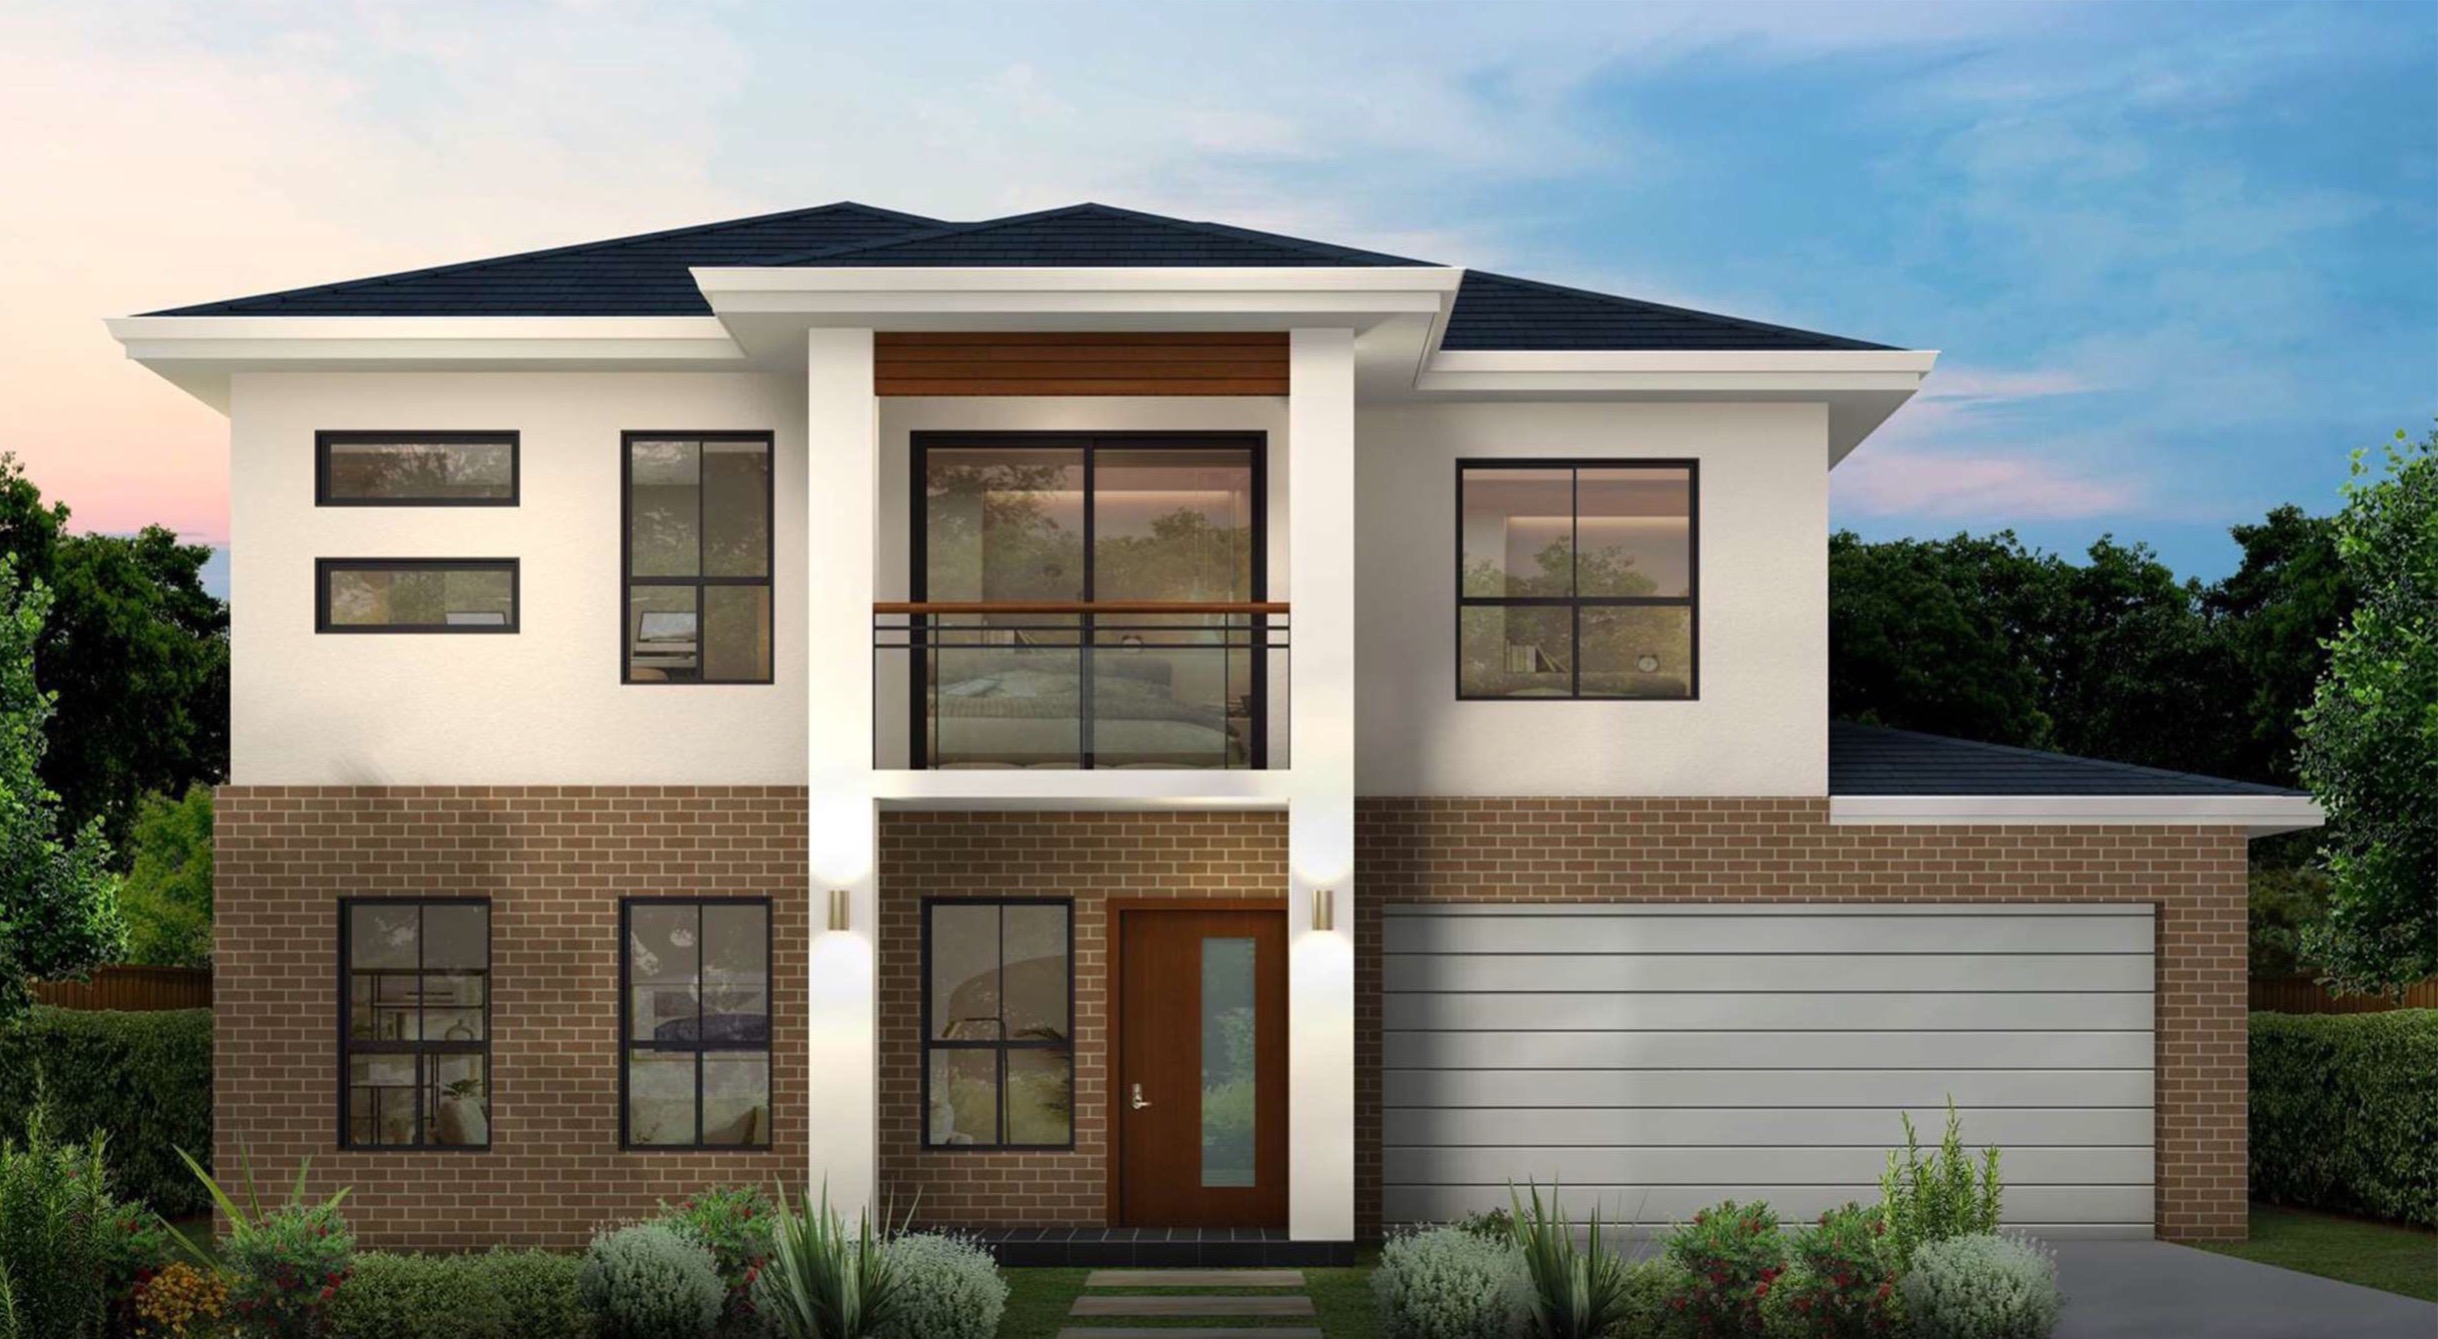 Your Dream House – Affordable House and Land in Northwest Box Hill, priced at $829,000 – $939,000.